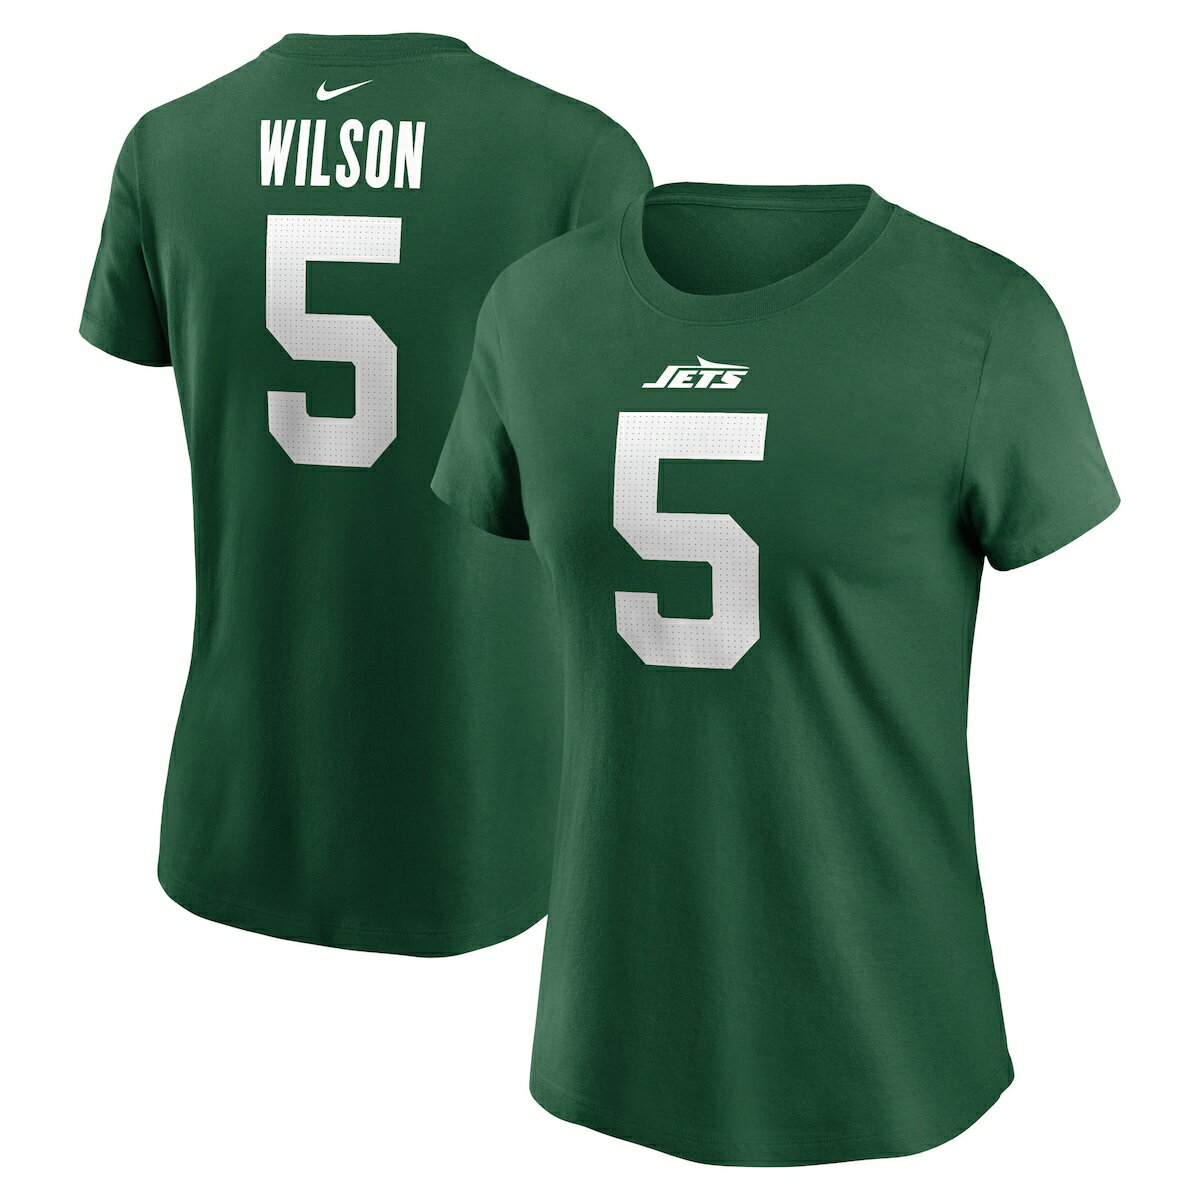 Represent your favorite player with this Nike Garrett Wilson Name & Number T-Shirt. It's designed as an everyday alternative to the new and improved on-field New York Jets jerseys. Soft fabric makes this New York Jets tee an ideal option for game day.Crew neckOfficially licensedImportedShort sleeveBrand: NikeScreen-print graphicsRibbed collarMaterial: 100% Cotton